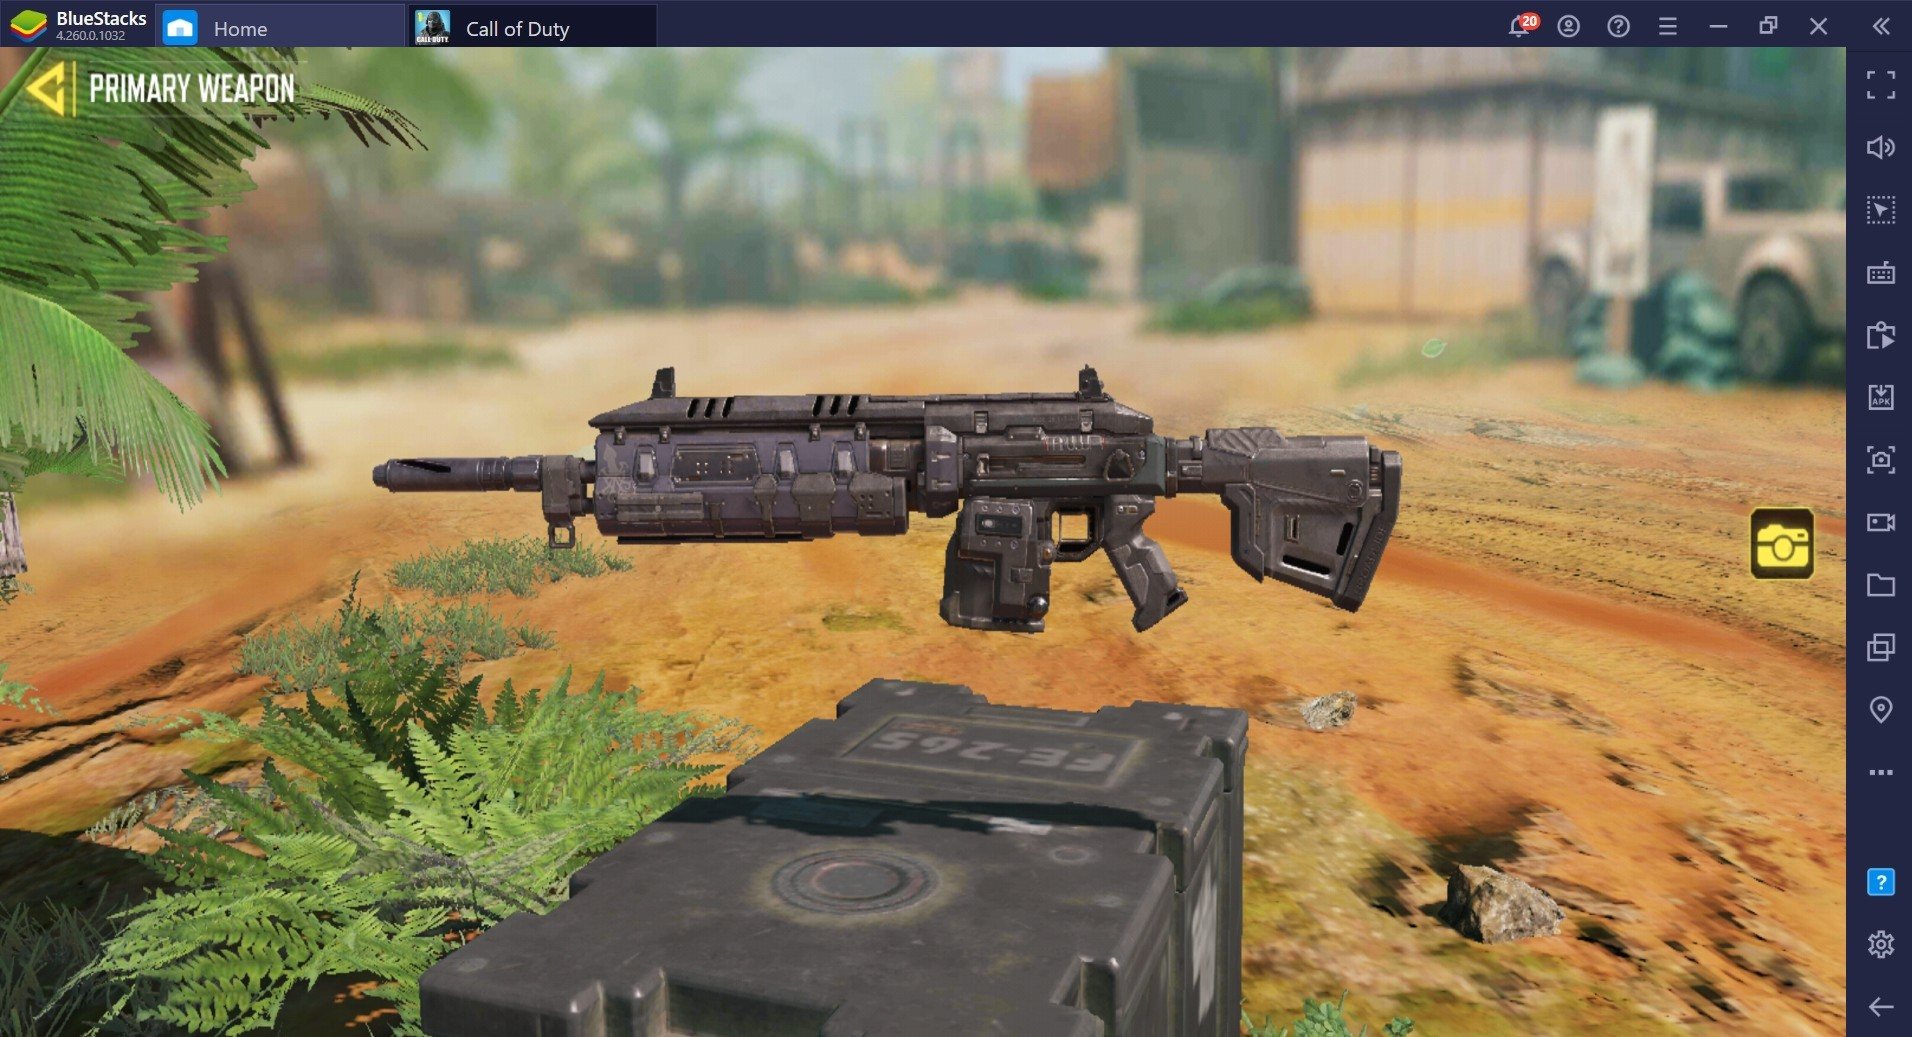 Call of Duty:Mobile Season 1 Weapon Guide, 10 Guns Ranked for Ranked Matches